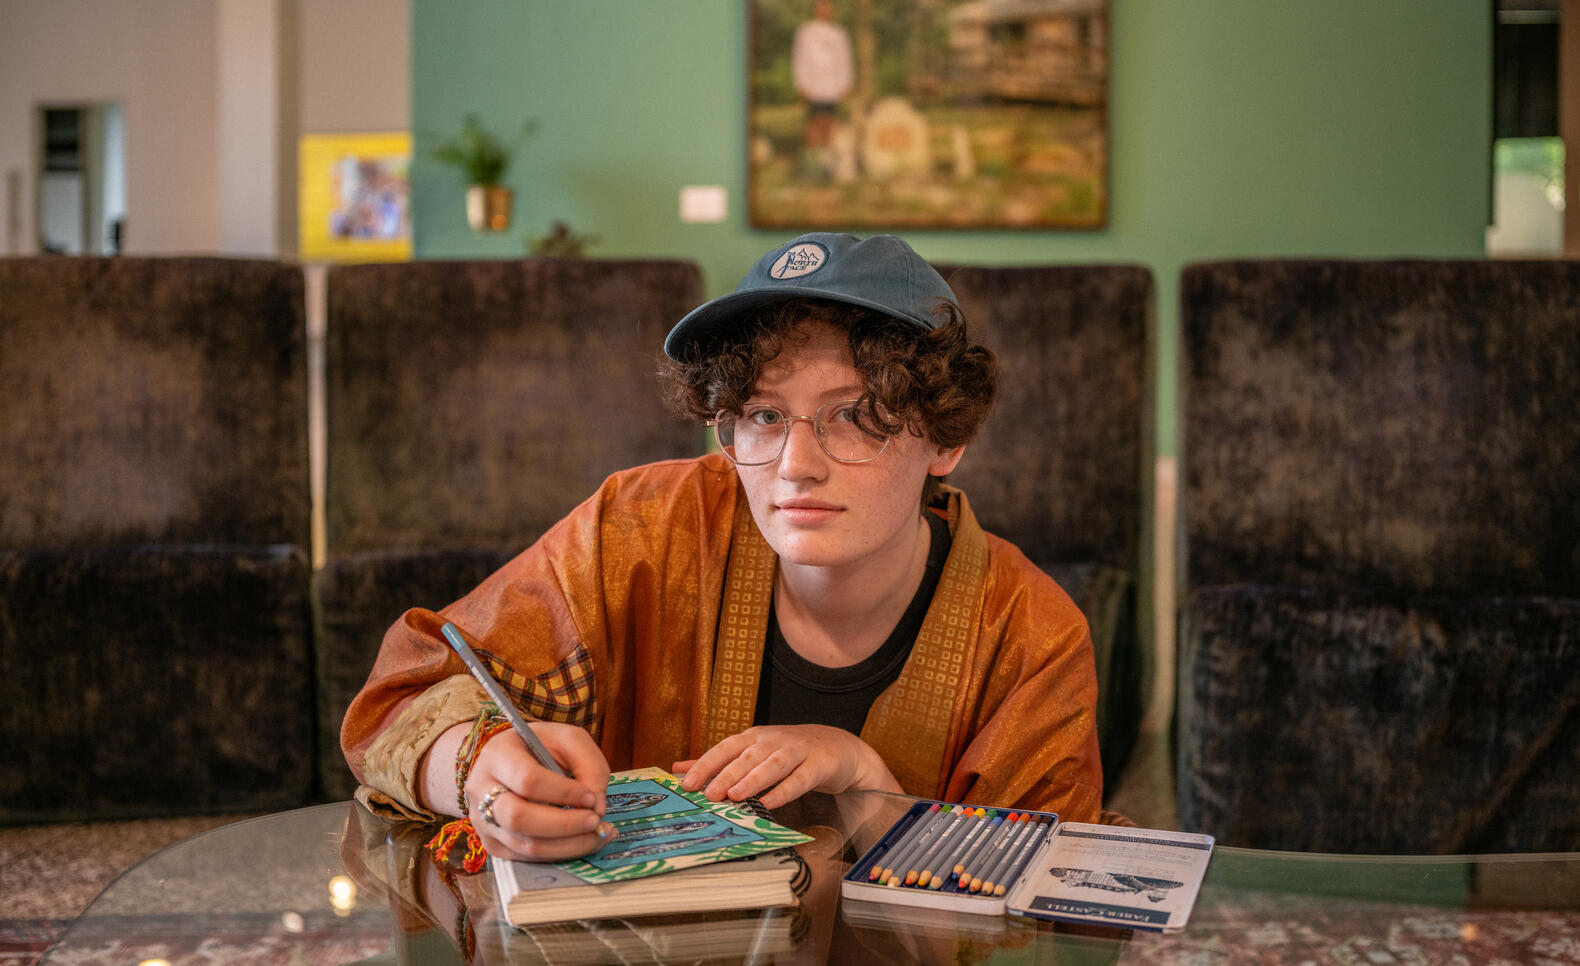 Student sits at a shiny table, looking directly at camera, as they work on a sketchbook. The student is wearing an orange shirt and blue baseball cap. The background shows a green wall and abstract image.